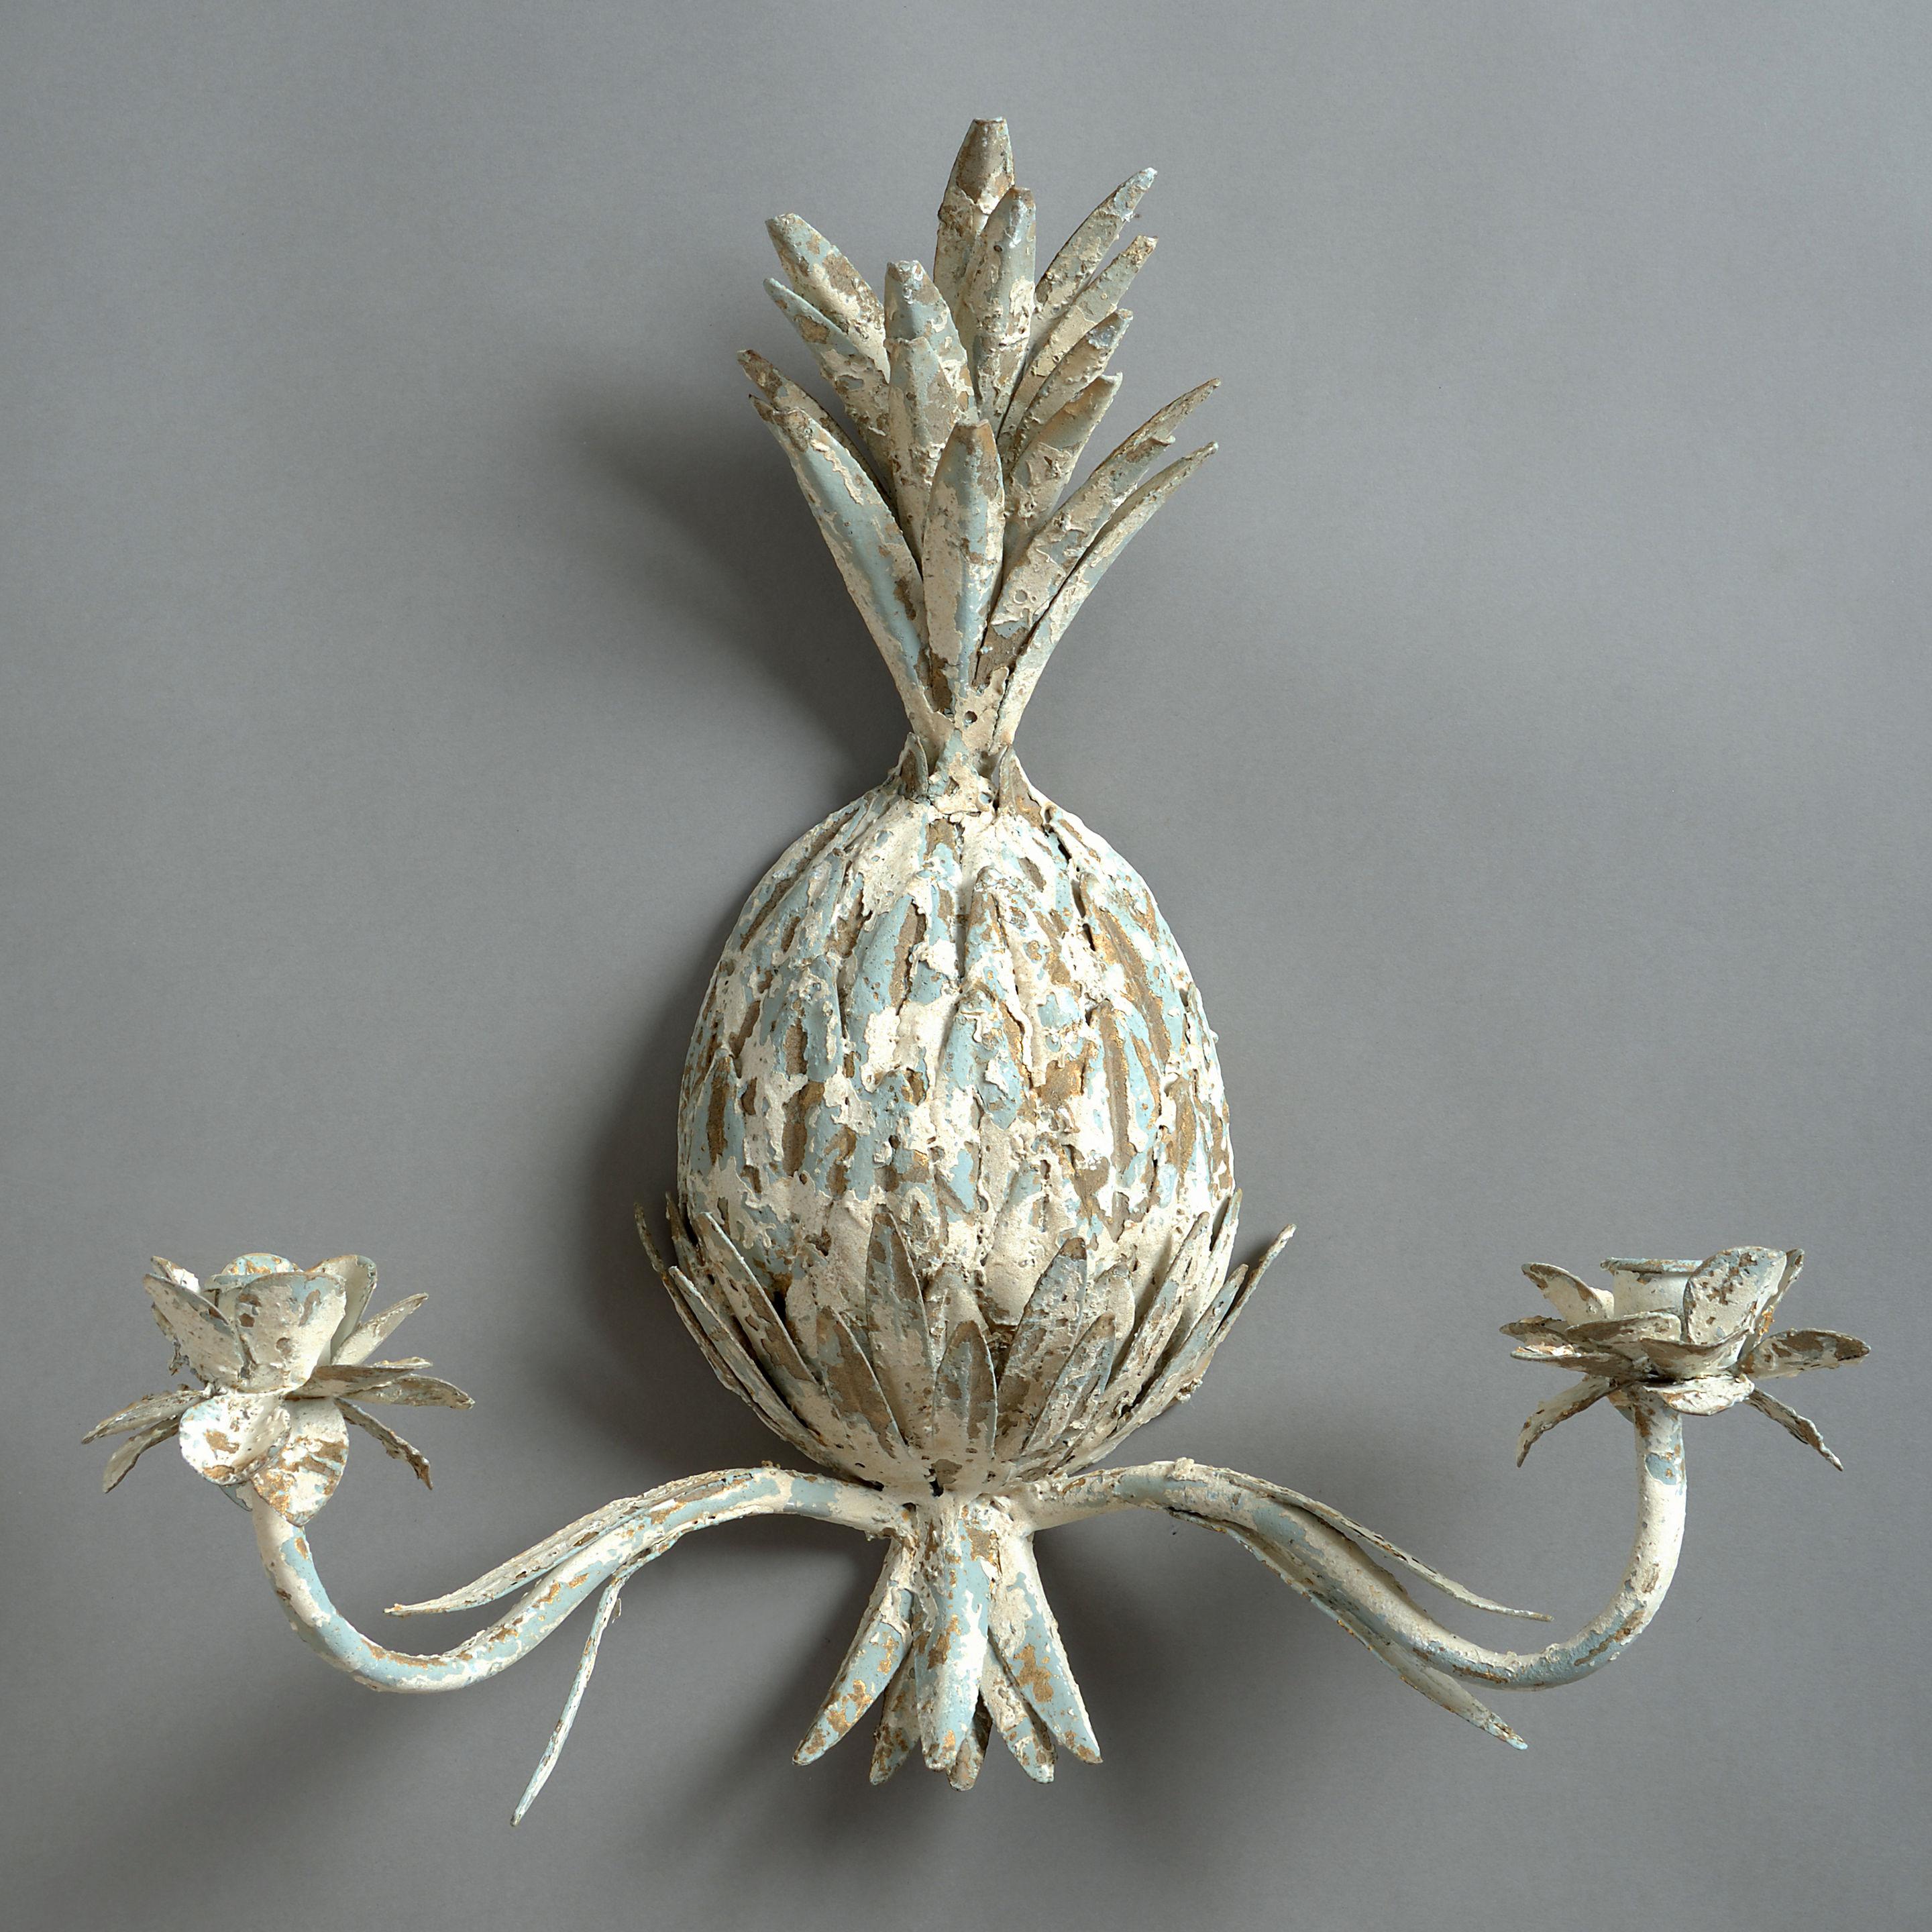 A pair of 20th century white painted tole two-arm wall lights, taking the form of pineapples. 

Traditionally, since early colonial times, the pineapple has become a symbol of welcome. The first European encounter with this fruit was by